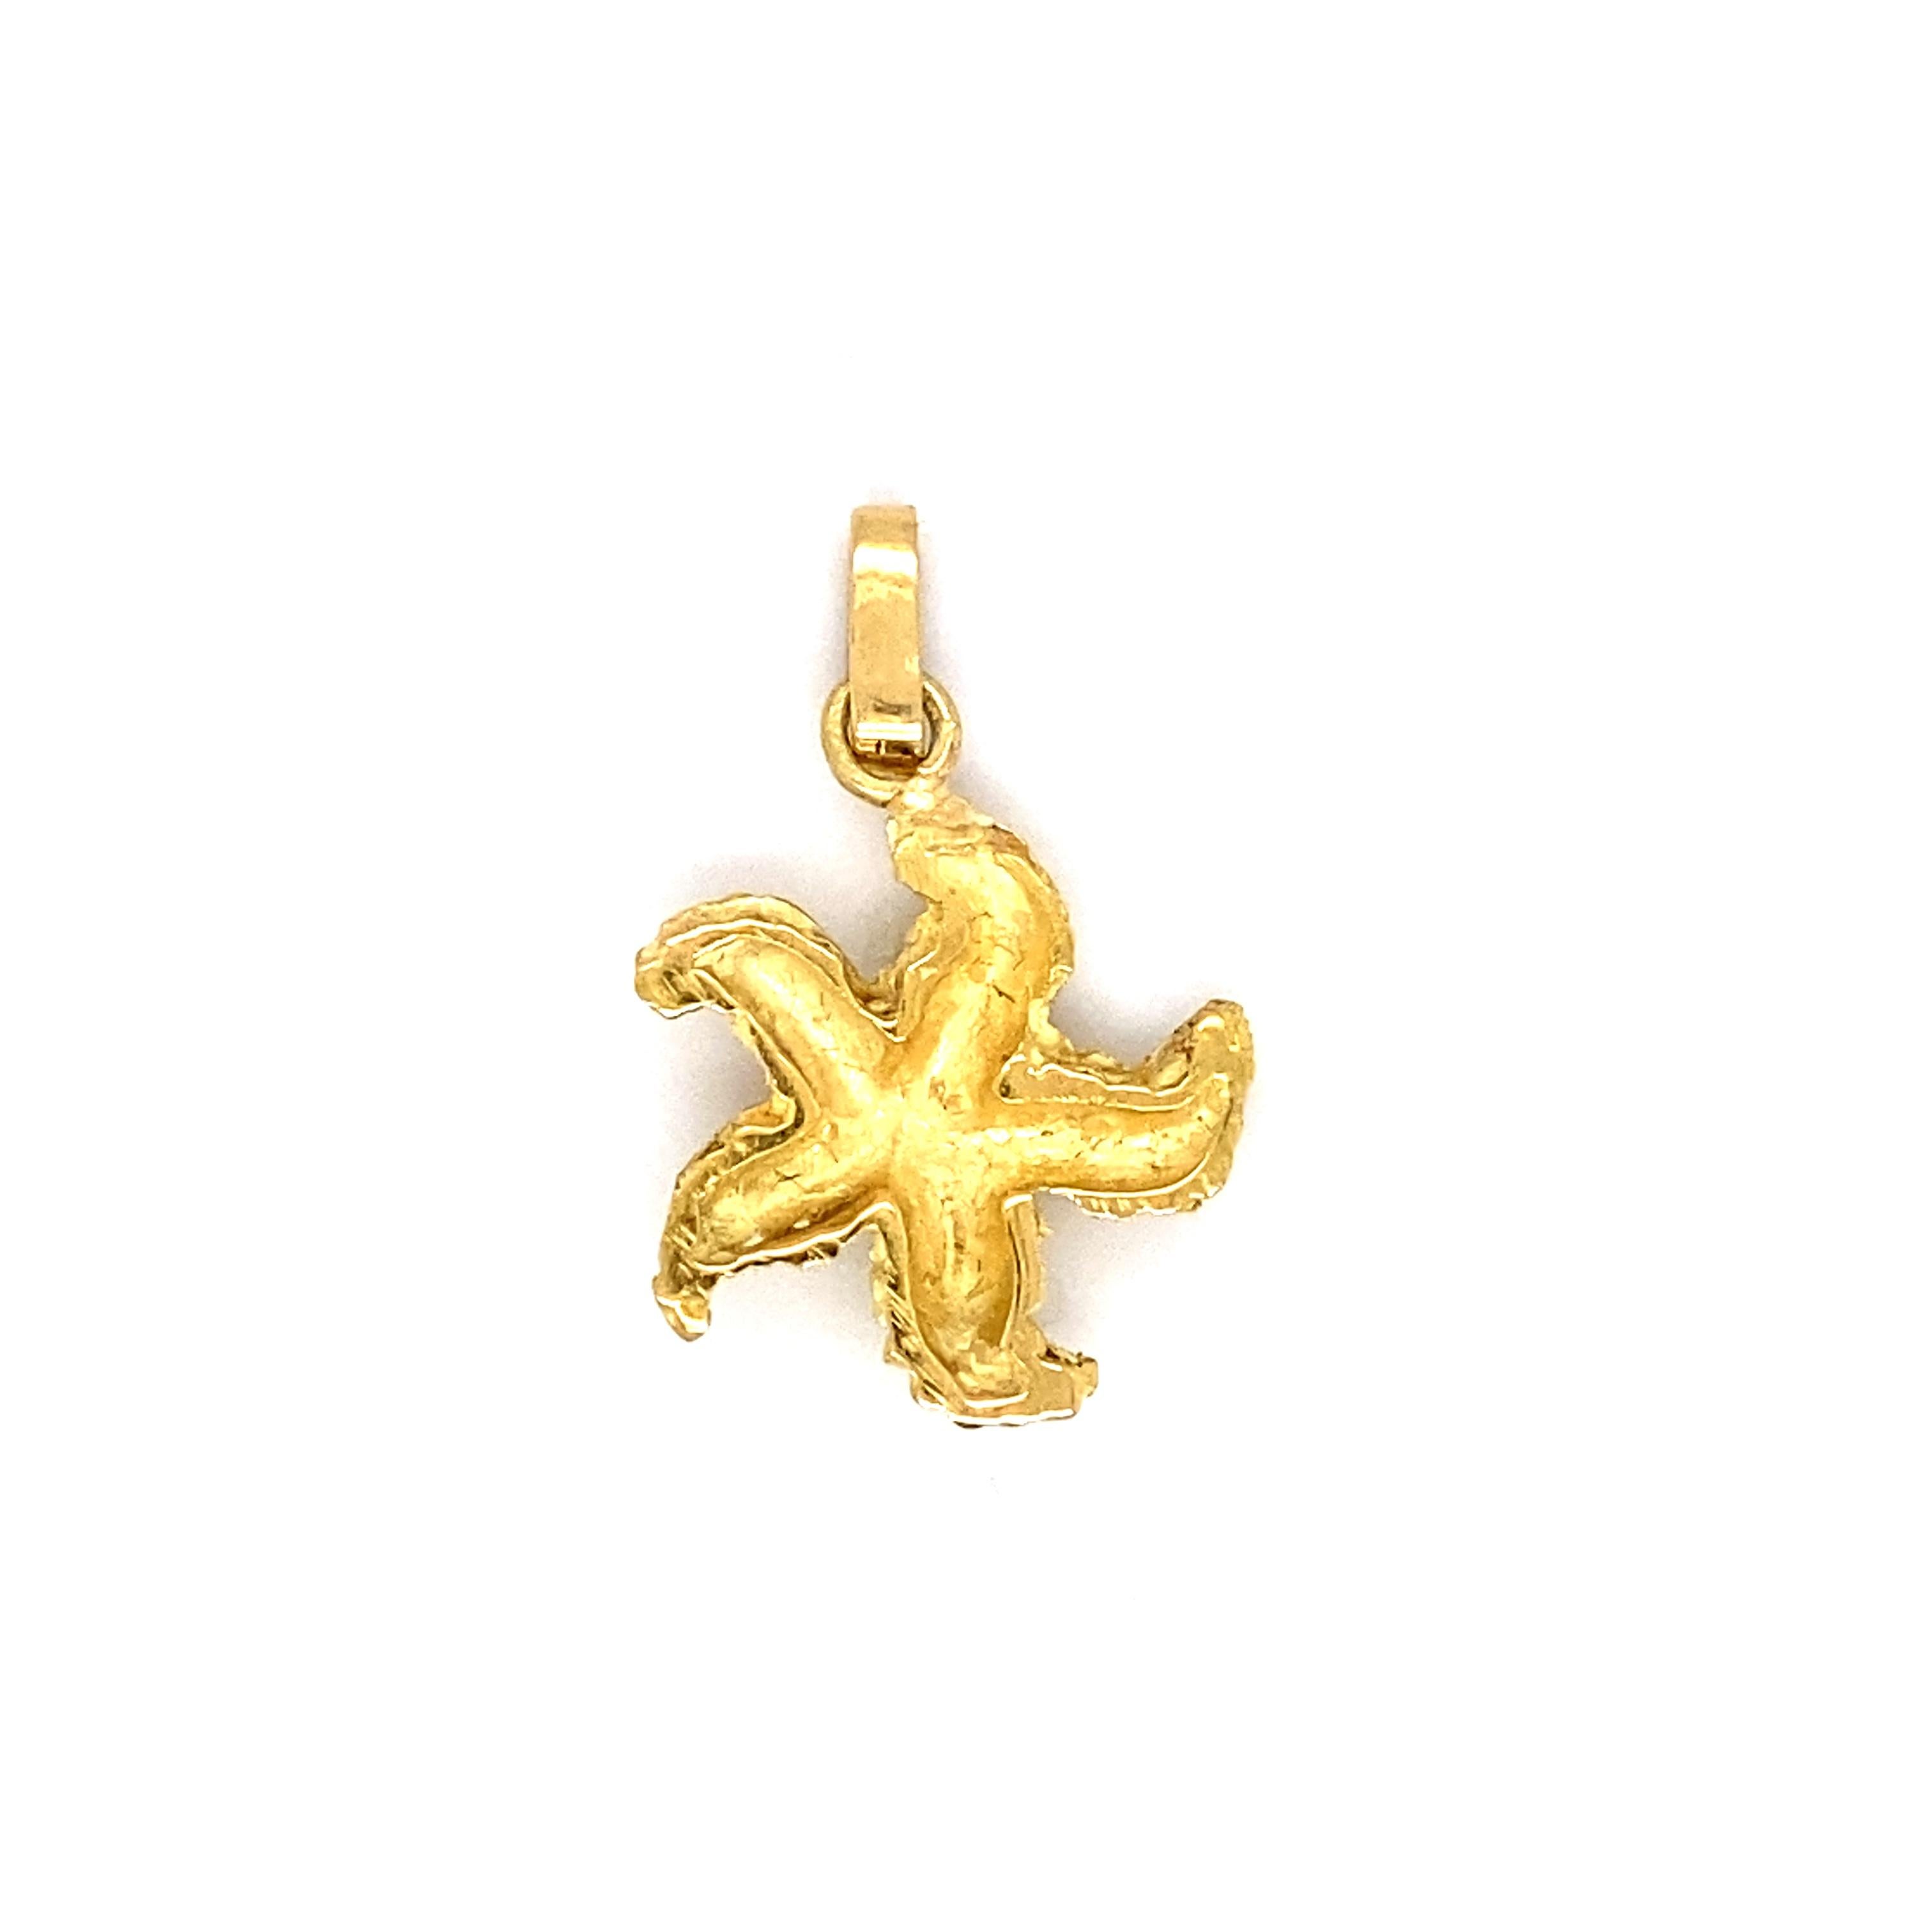 Item Details:
Circa 1980s
Metal Type: 18 karat gold 
Weight: 4.0 grams
Size: 0.75 in W x 1.0 in L including bail

This pendant also has a matching pair of earrings, also available in our shop.